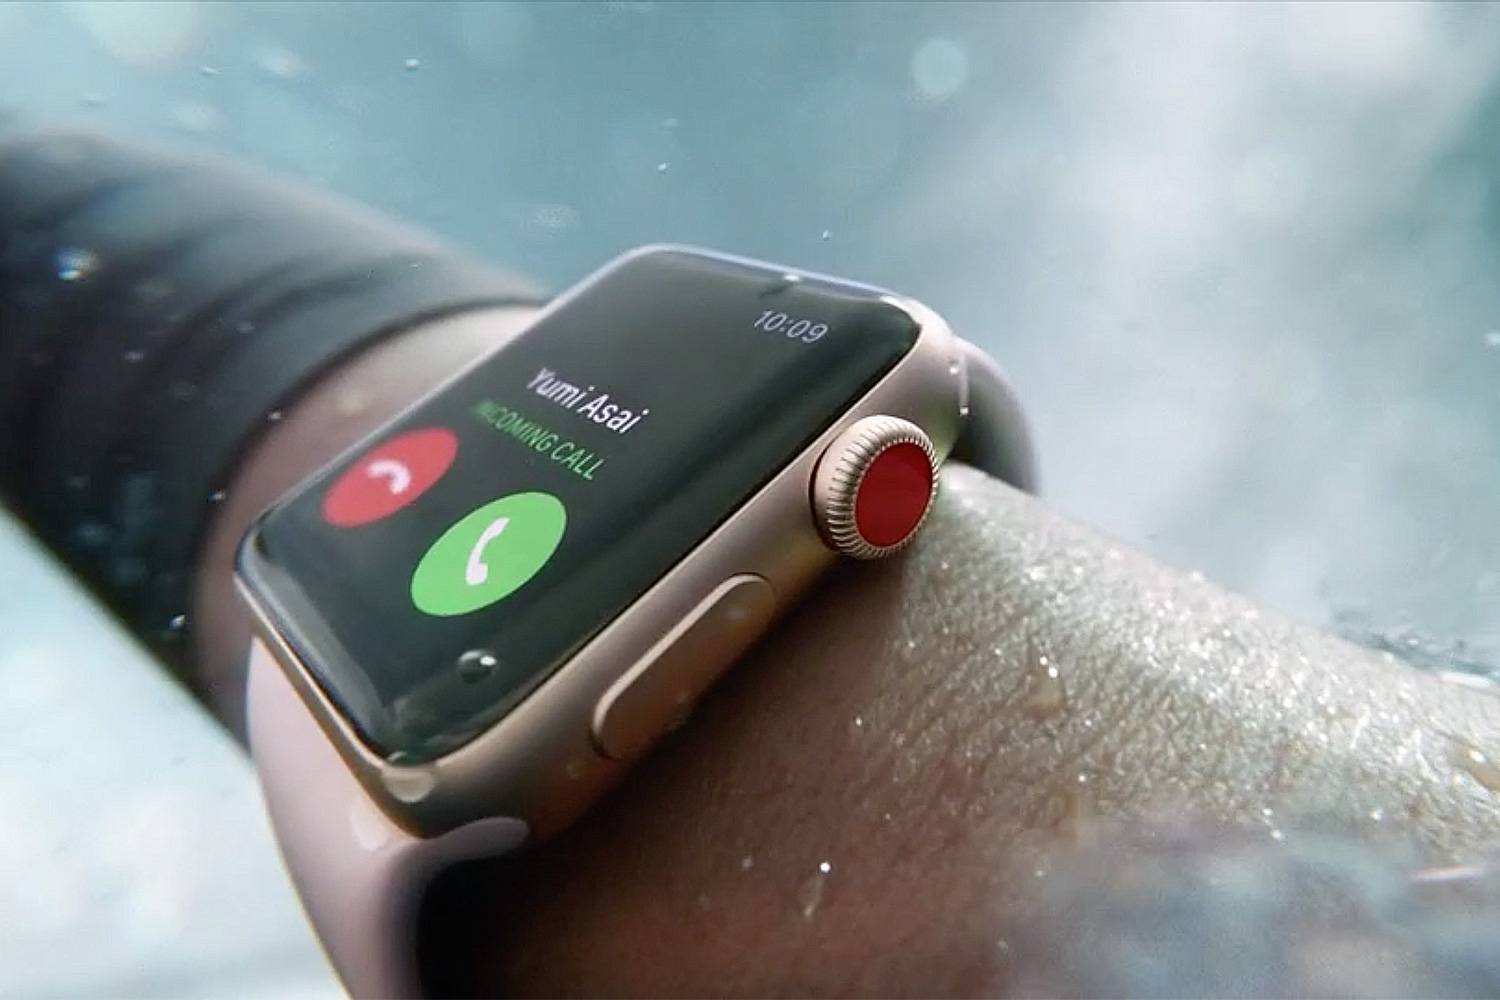 Is the Apple Watch Series 3 Worth It in 2023? What Model to Buy Instead